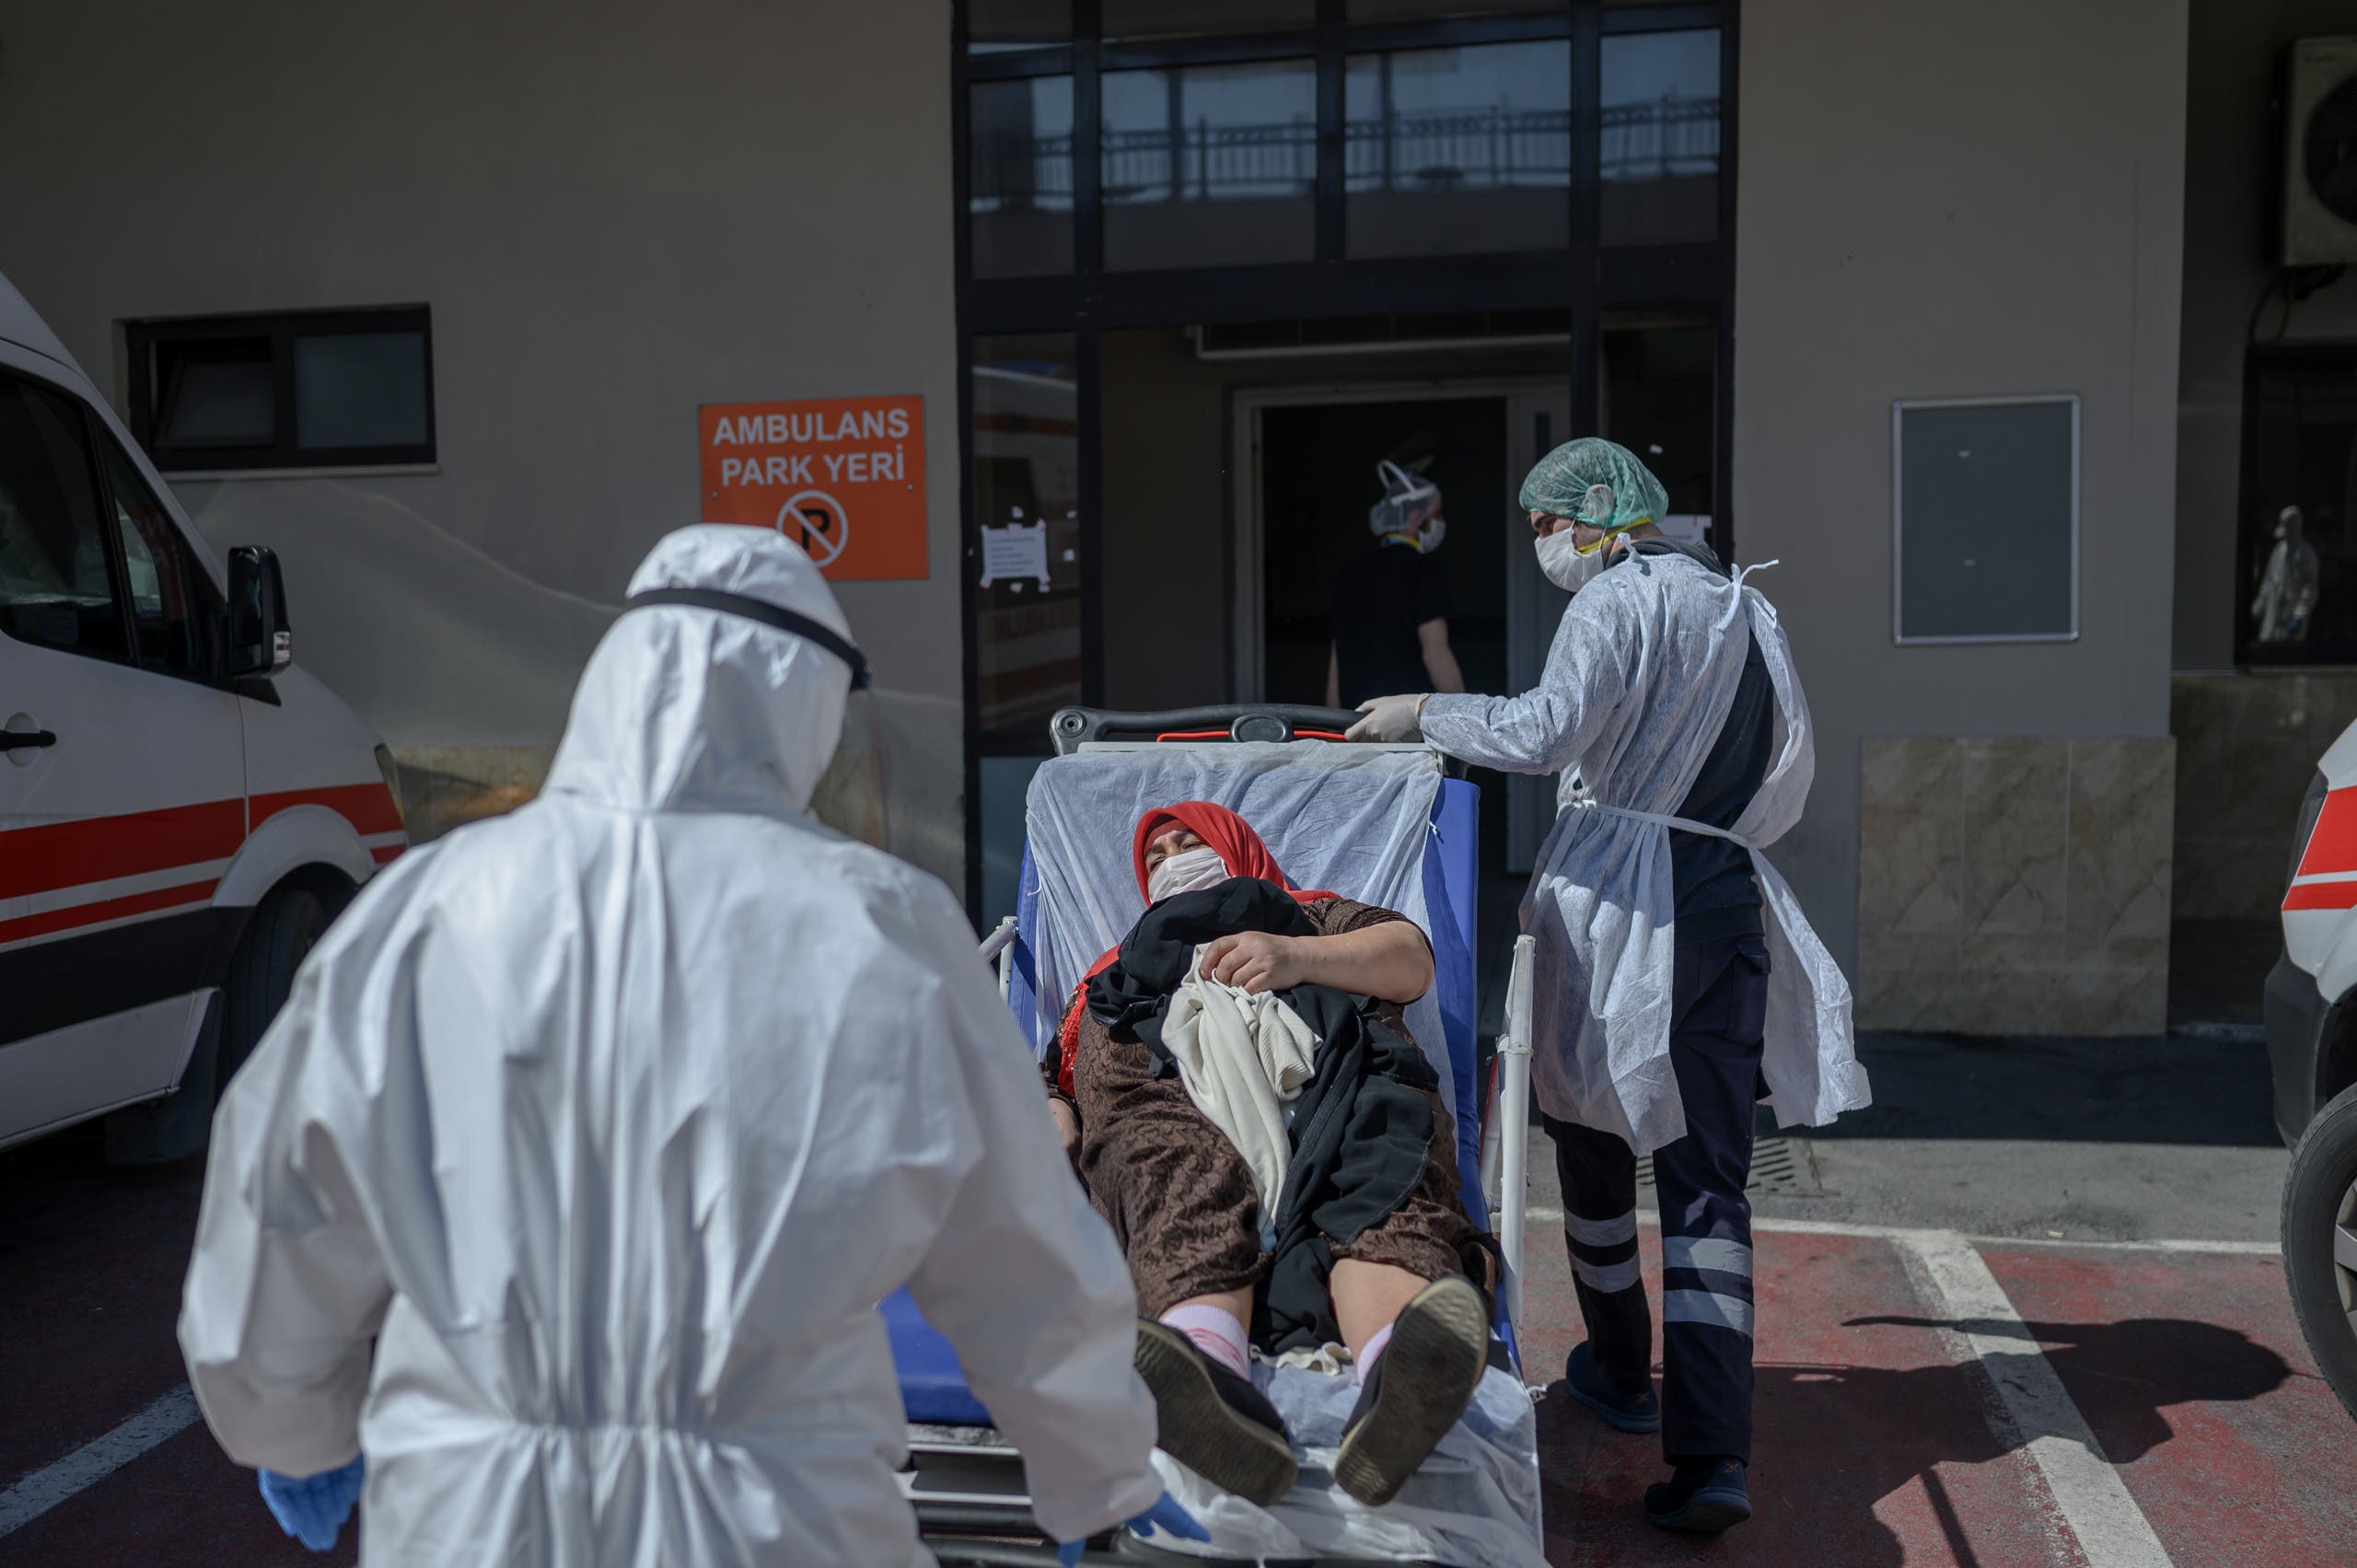 Health workers transport a patient supposed to be infected by the novel coronavirus Covid19 in front of Bagcilar public hospital in Istanbul, on April 28, 2019, in Istanbul. (AFP)